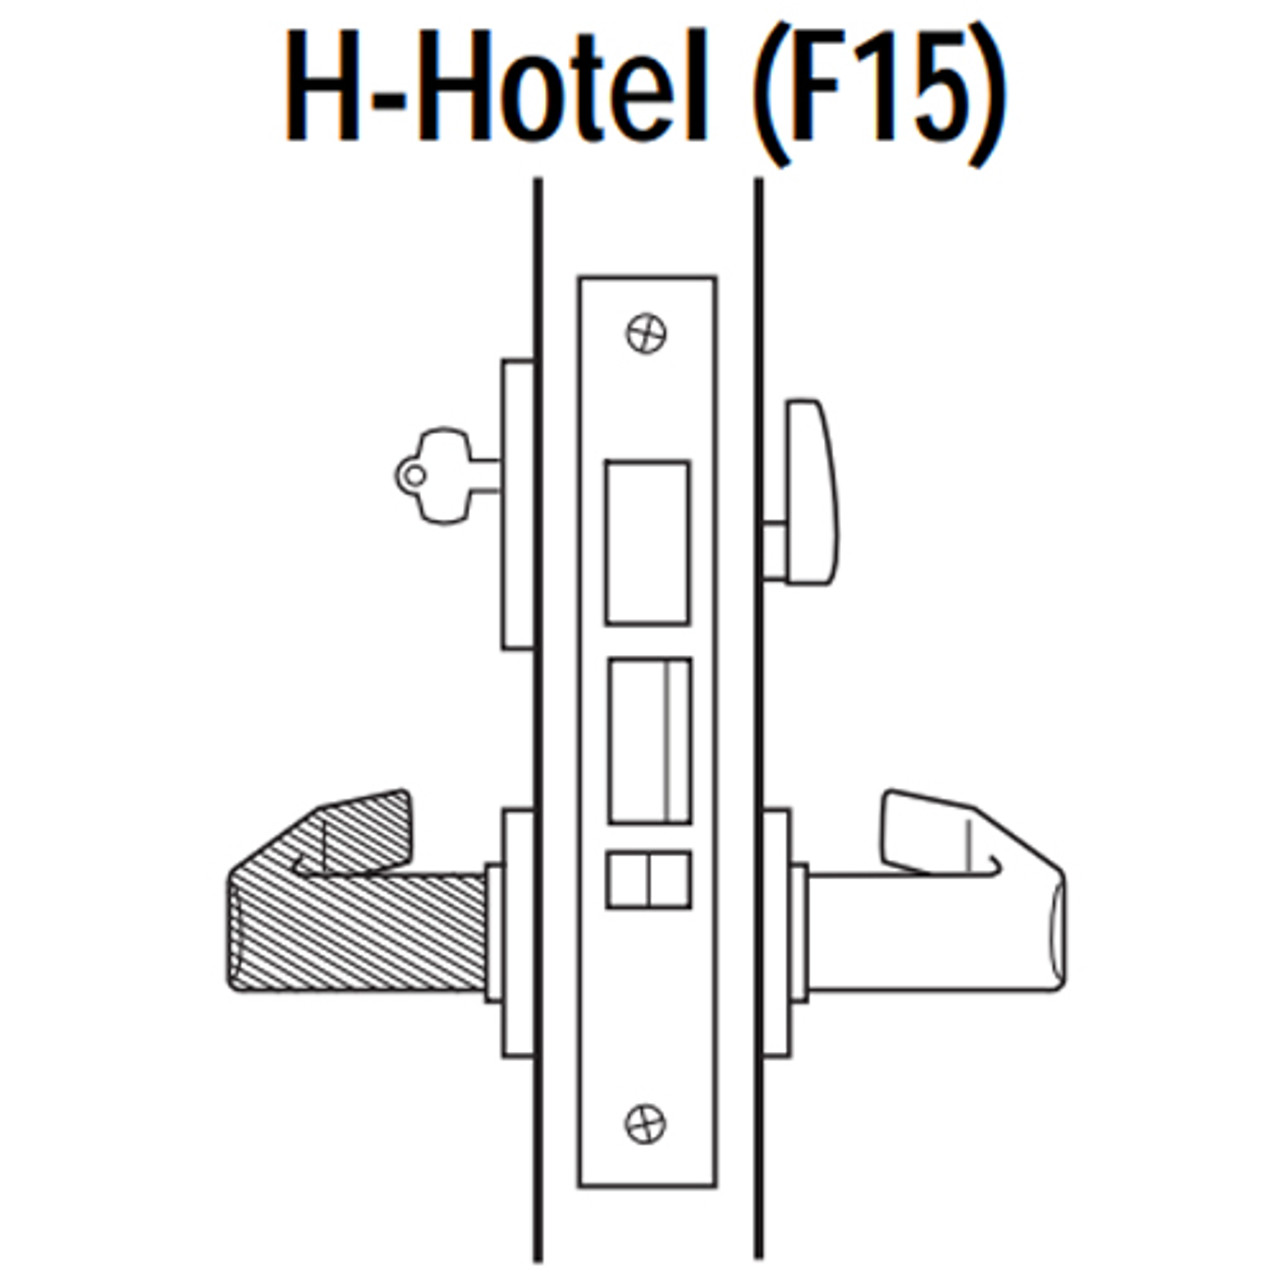 45H7H17LH605 Best 40H Series Hotel with Deadbolt Heavy Duty Mortise Lever Lock with Gull Wing LH in Bright Brass